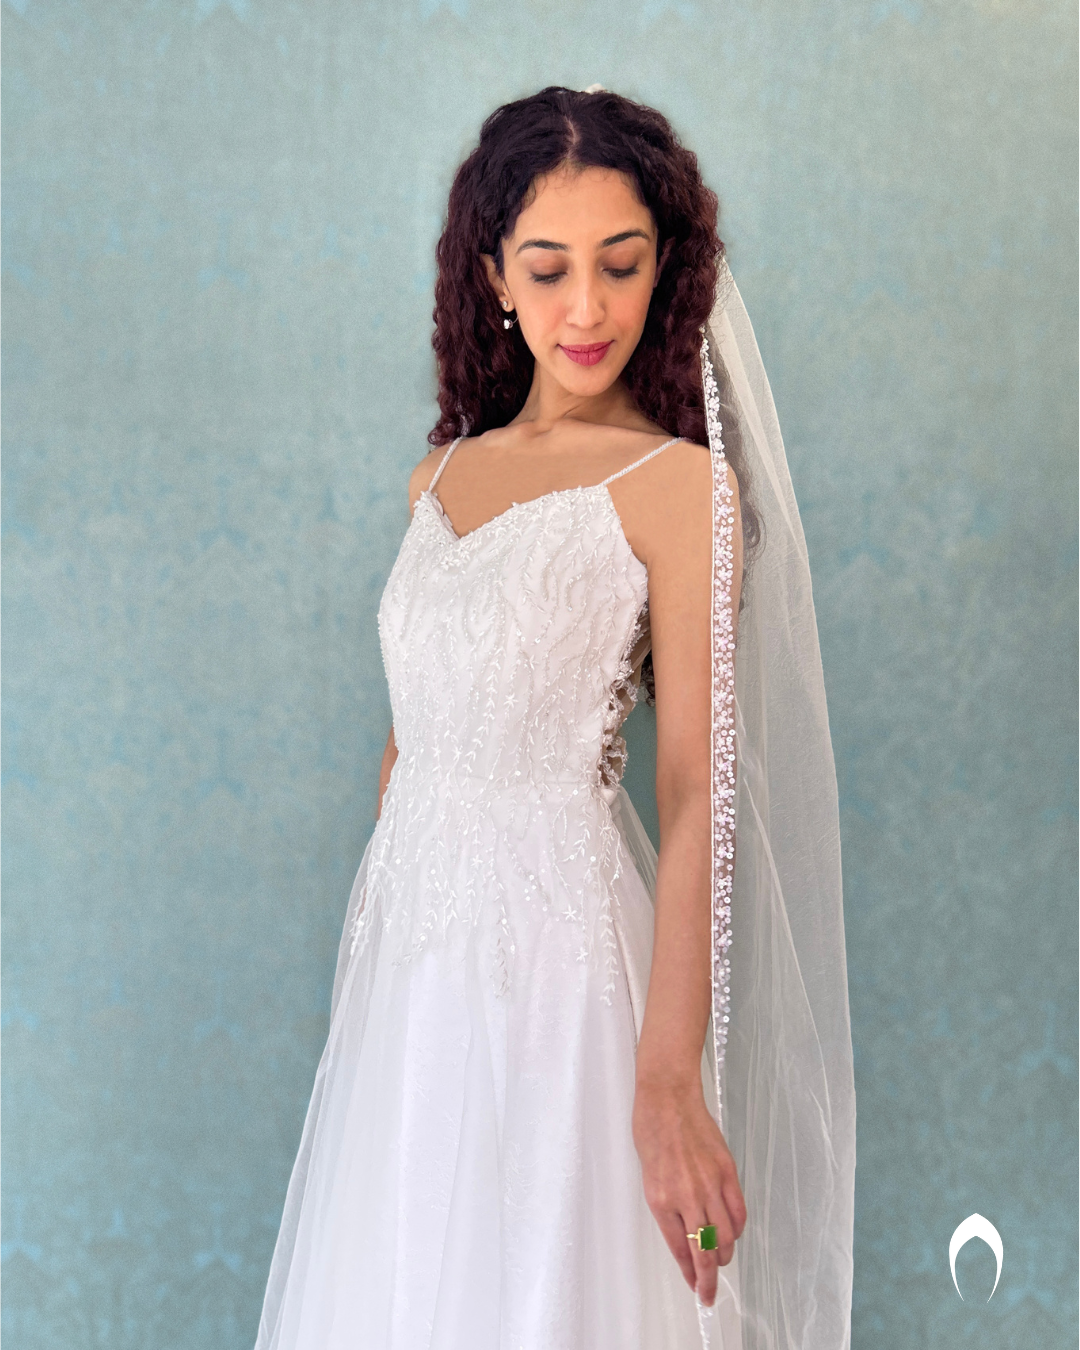 Signature  christian bridal Aline gown in net minimal flair and a spaghetti sleeve